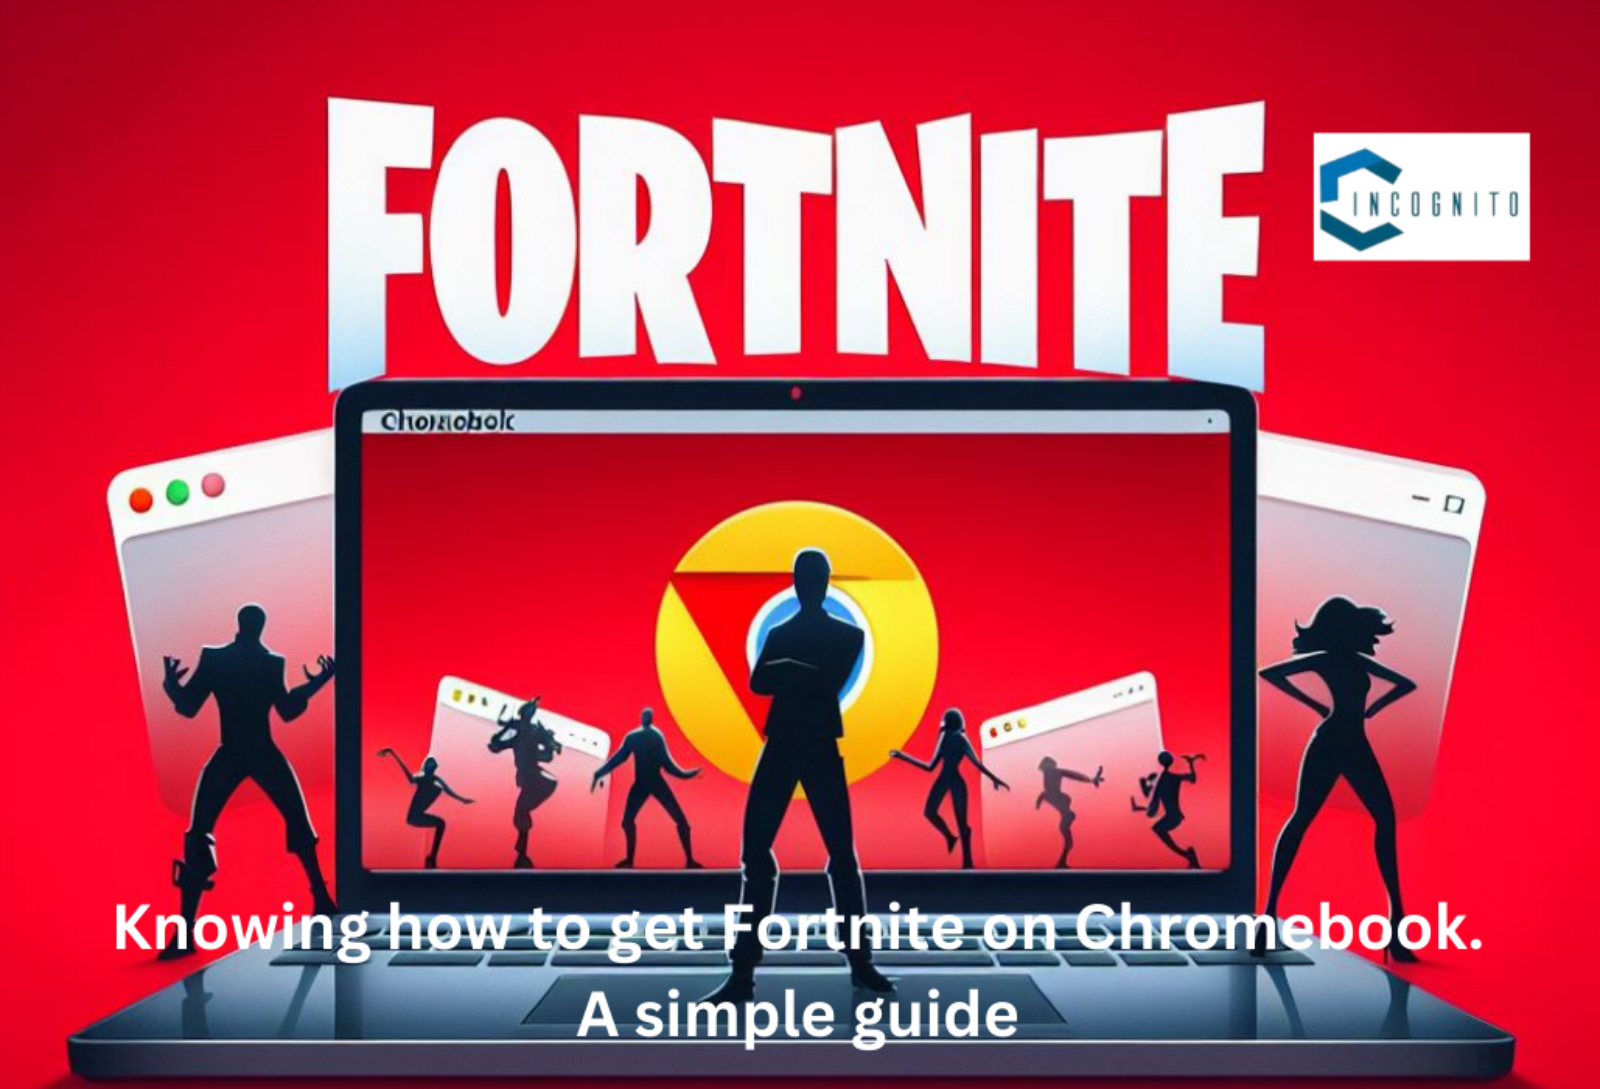 How To Get Fortnite on Chromebook